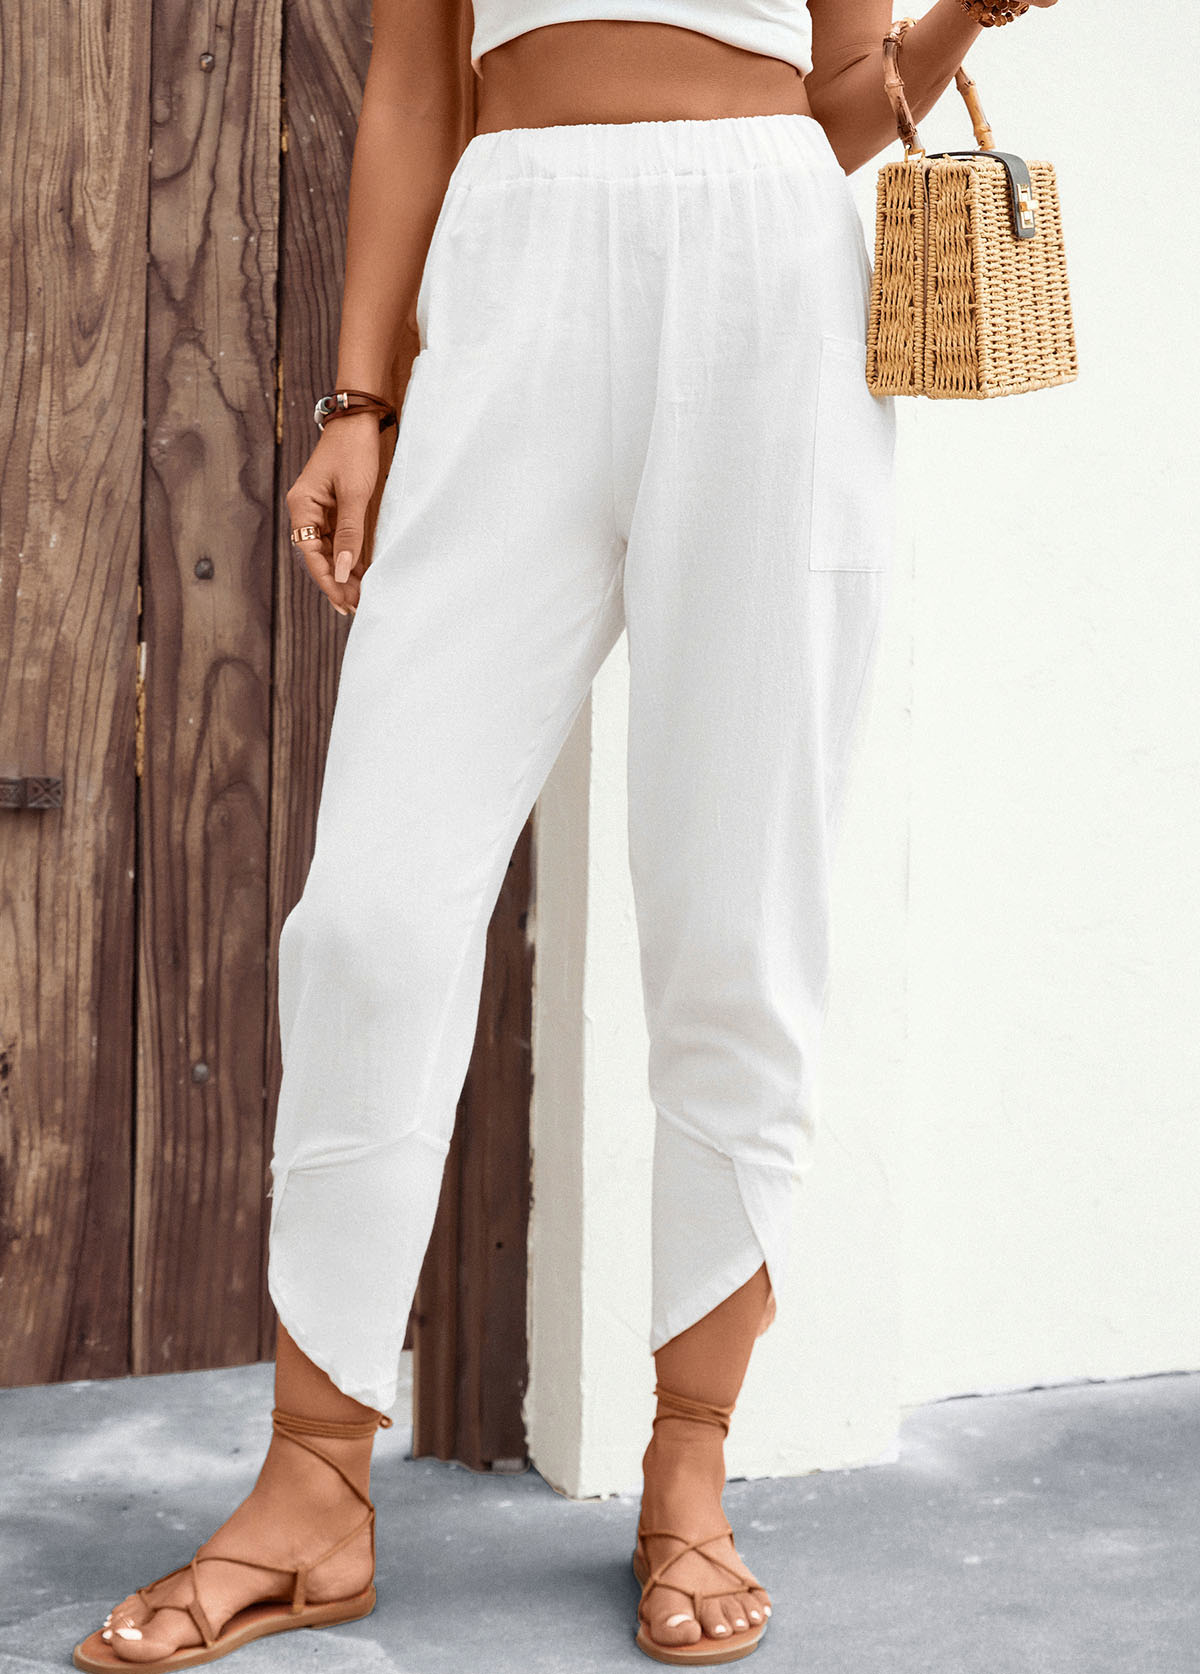 Patchwork White Jogger Elastic Waist High Waisted Pants